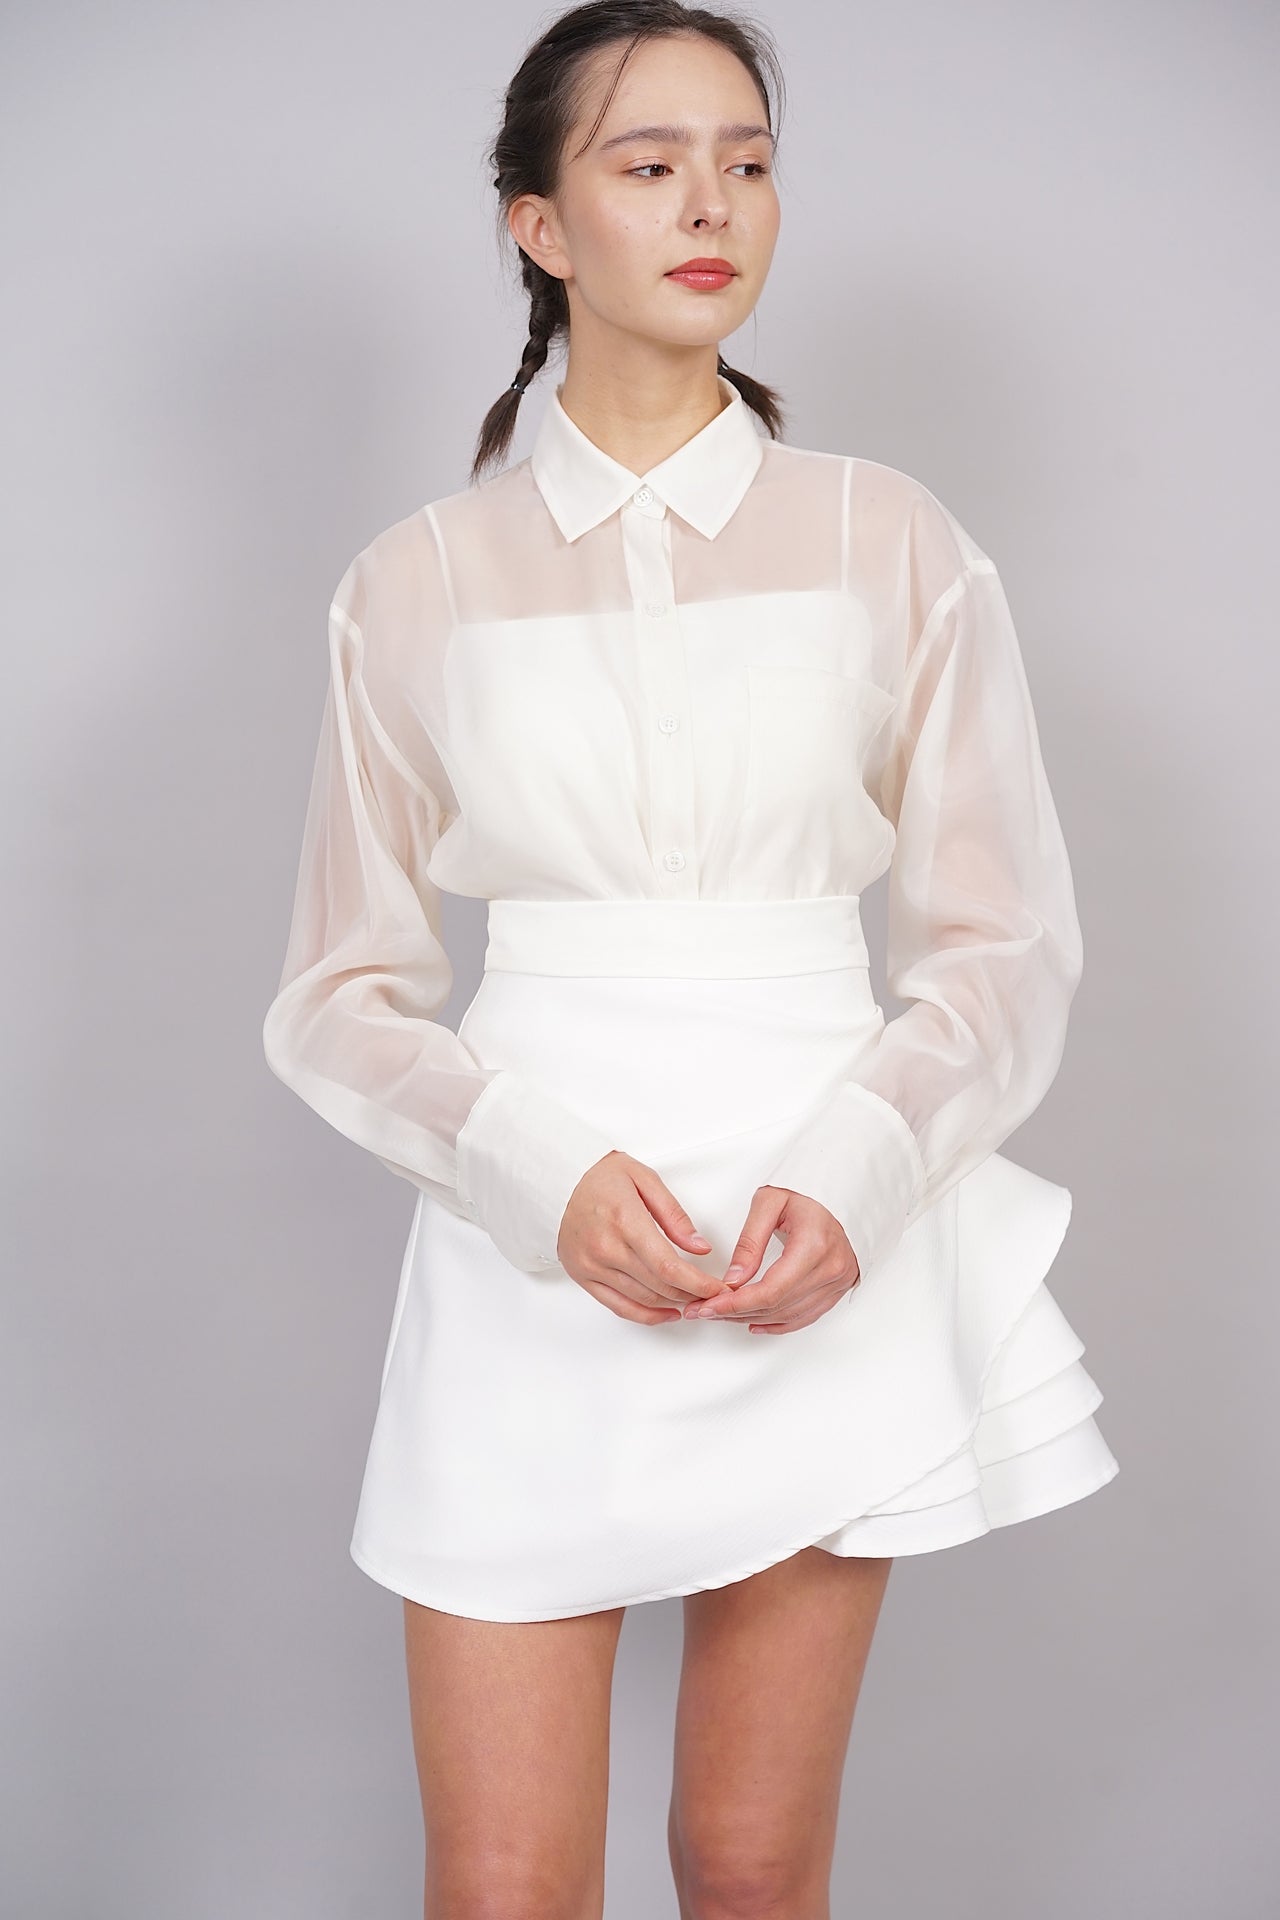 Sheer See-Through Shirt in Ivory - Arriving Soon